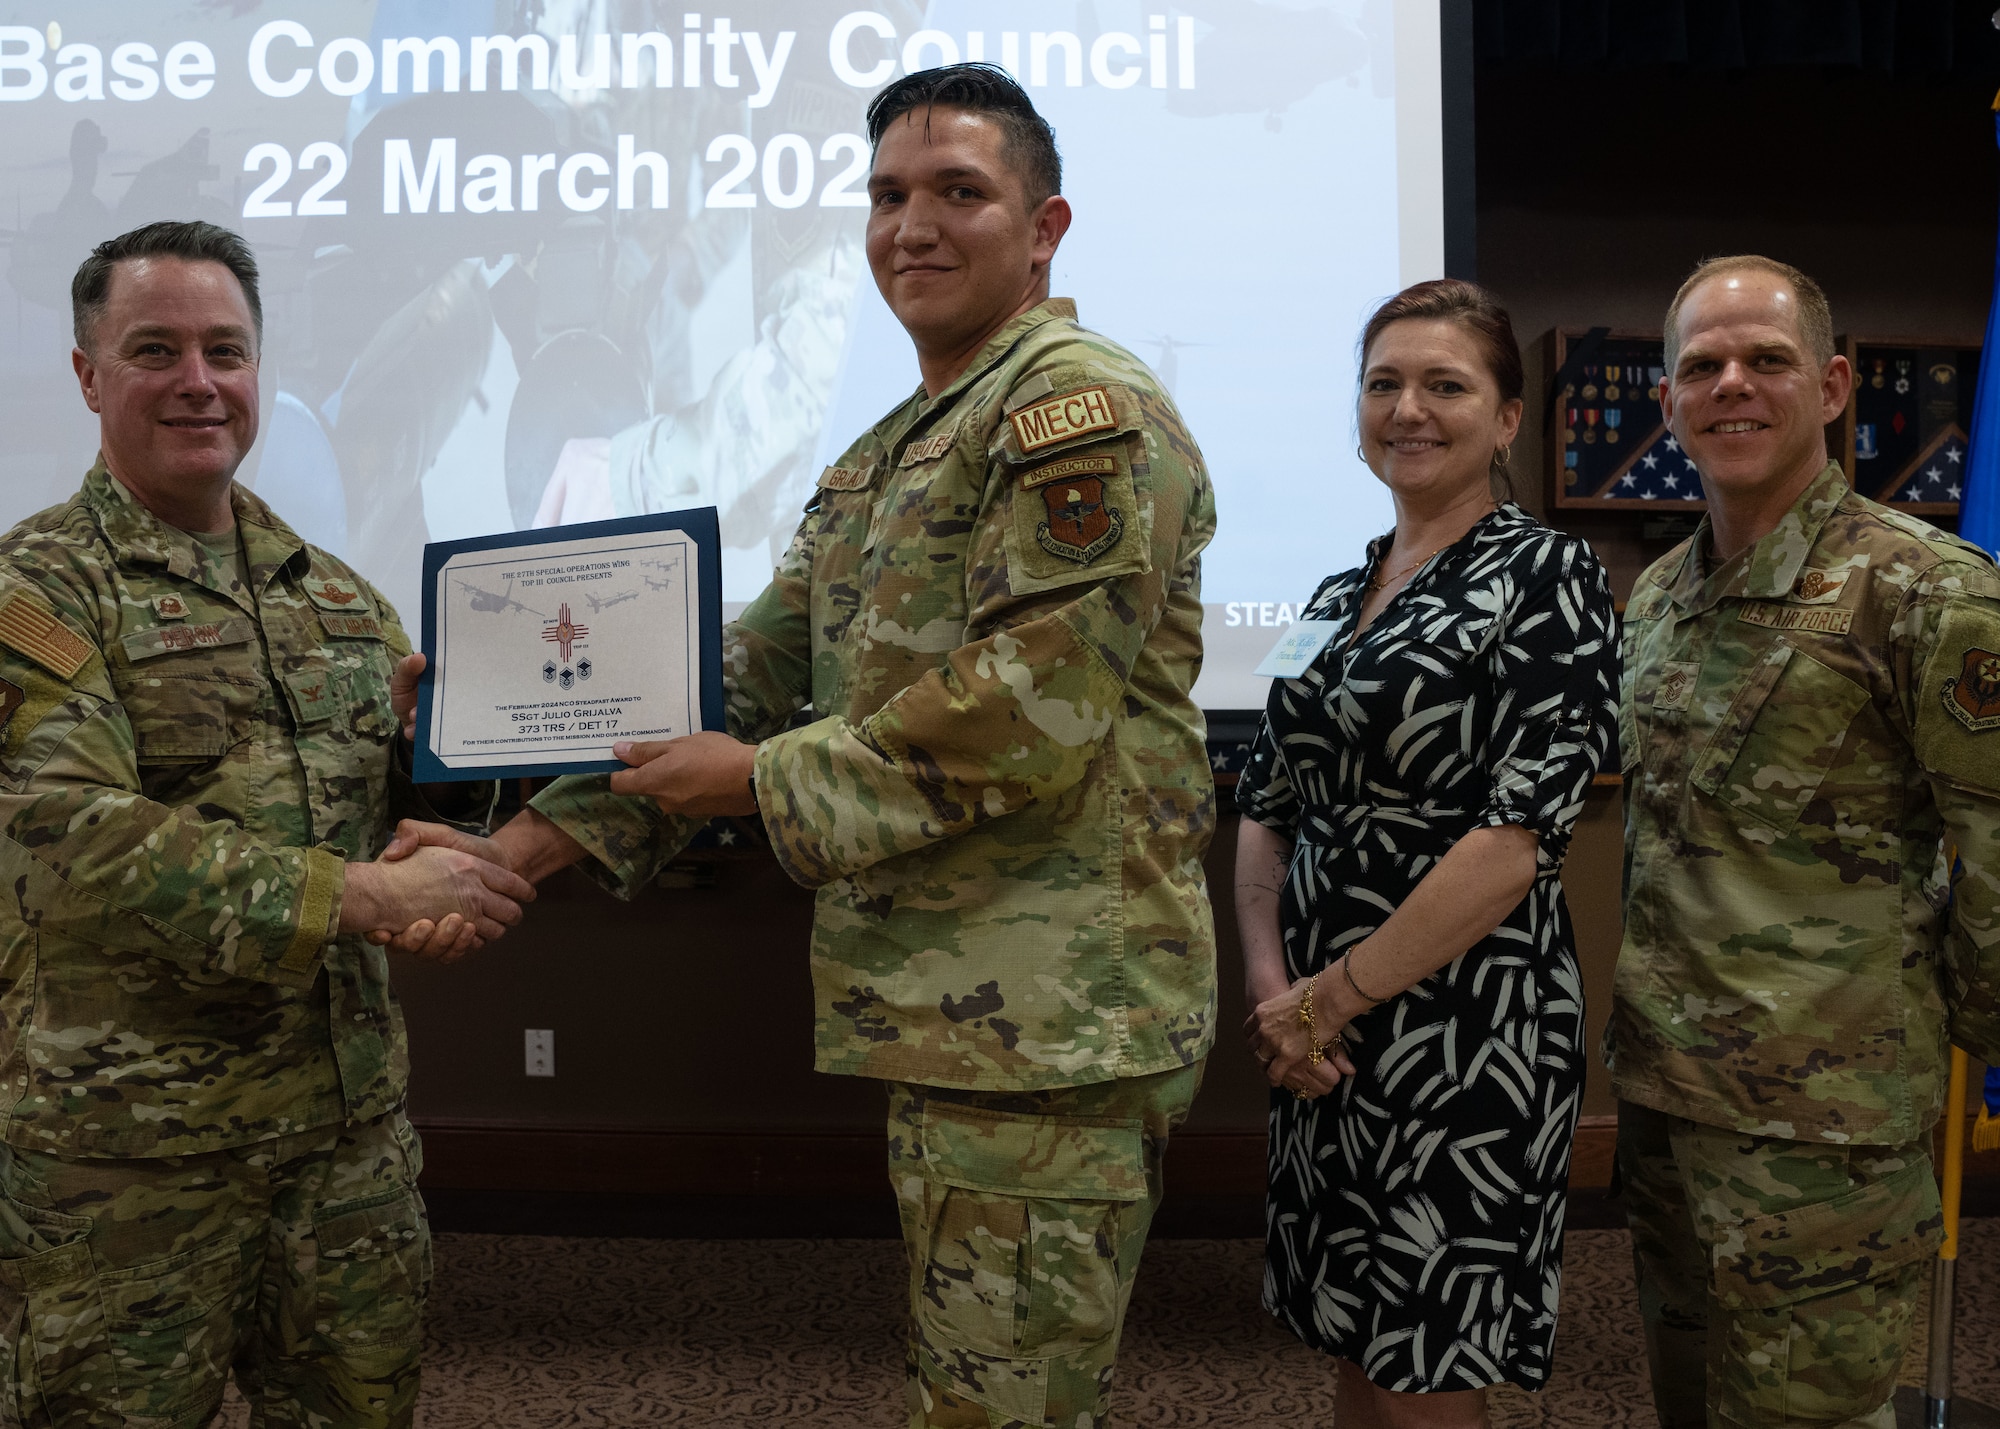 U.S Air Force Staff Sgt. Julio Grijalva, assigned
to the 373rd Training Squadron, Det 17, receives
the Top III Steadfast Line award from U.S. Air
Force Col. Jeremy Bergin, 27th Special
Operations Wing commander at Cannon Air Force
Base, N.M., March 22, 2024, during the Base
Community Council. The BCC is an
action-oriented, multi-community organization
that supports the common interest of the military
and civilian communities through mutual
understanding and joint participation in common
activities. (U.S Air Force Photo by Senior
Airman Mateo Parra)